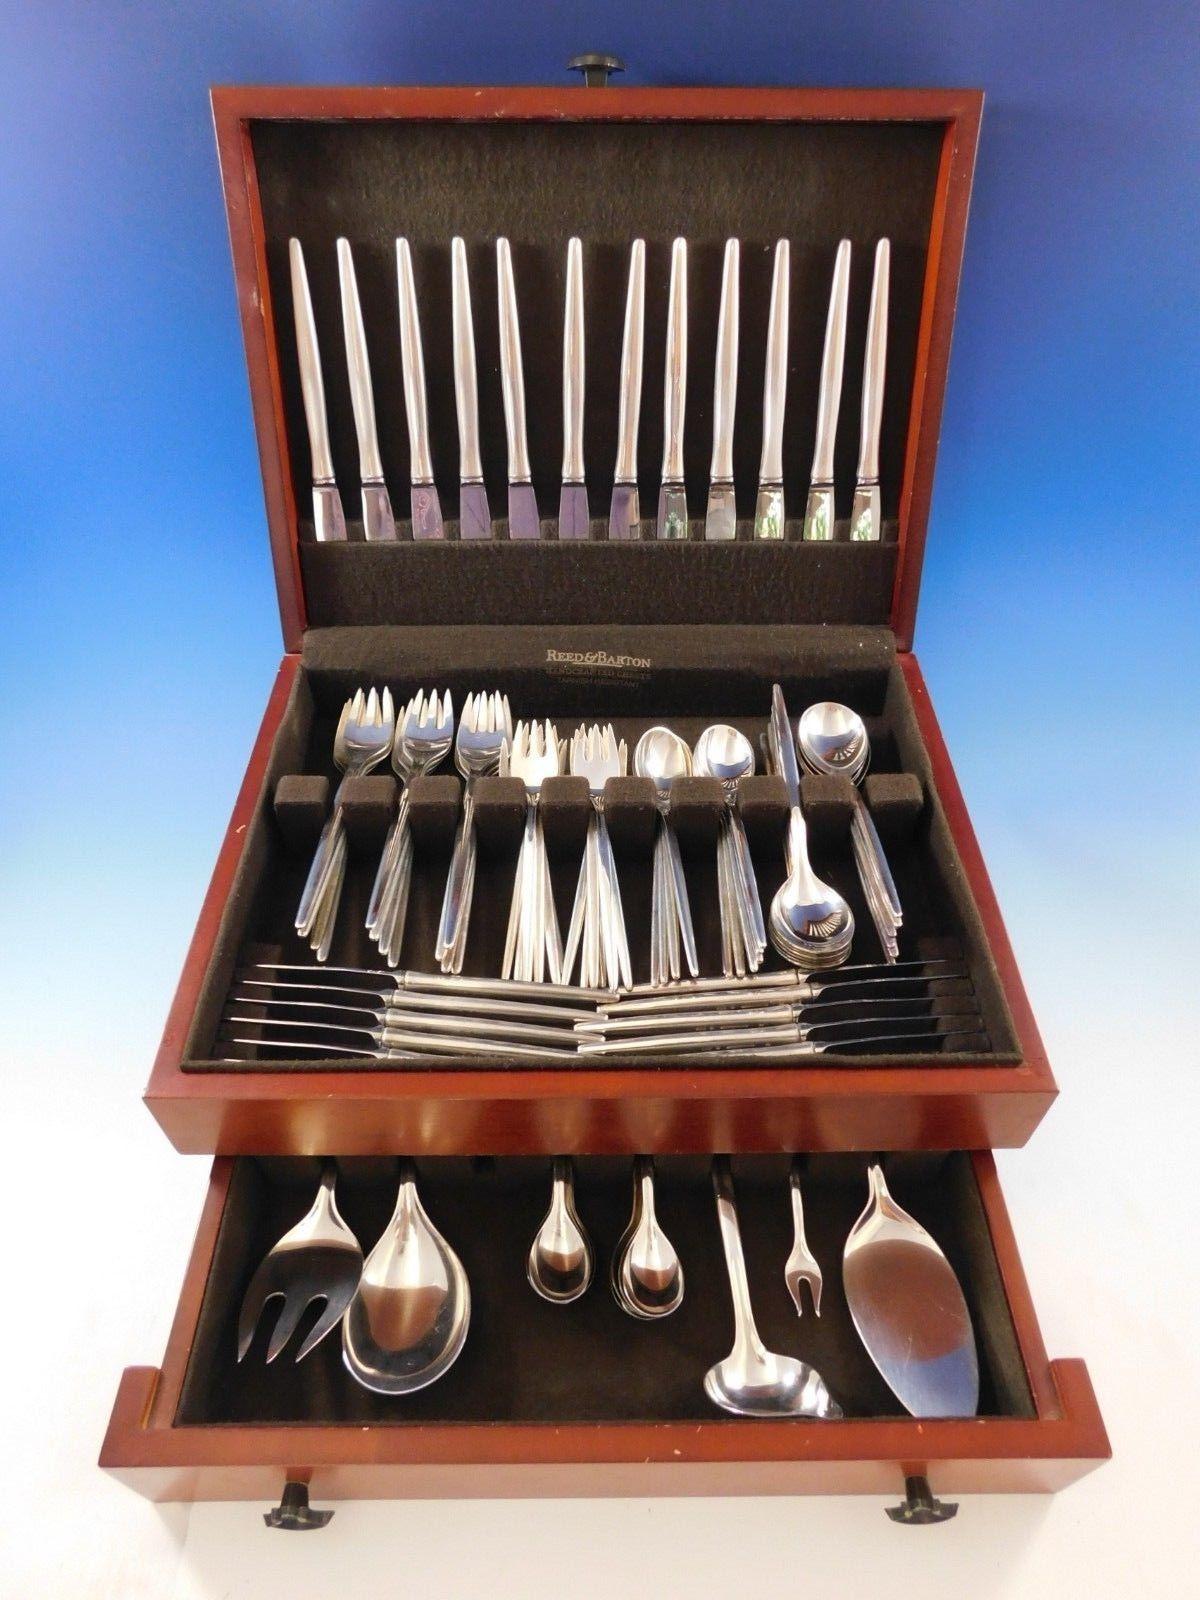 Huge tulip by Michelsen sterling silver flatware set, 89 pieces. This set includes:

12 dinner size knives, 8 3/8